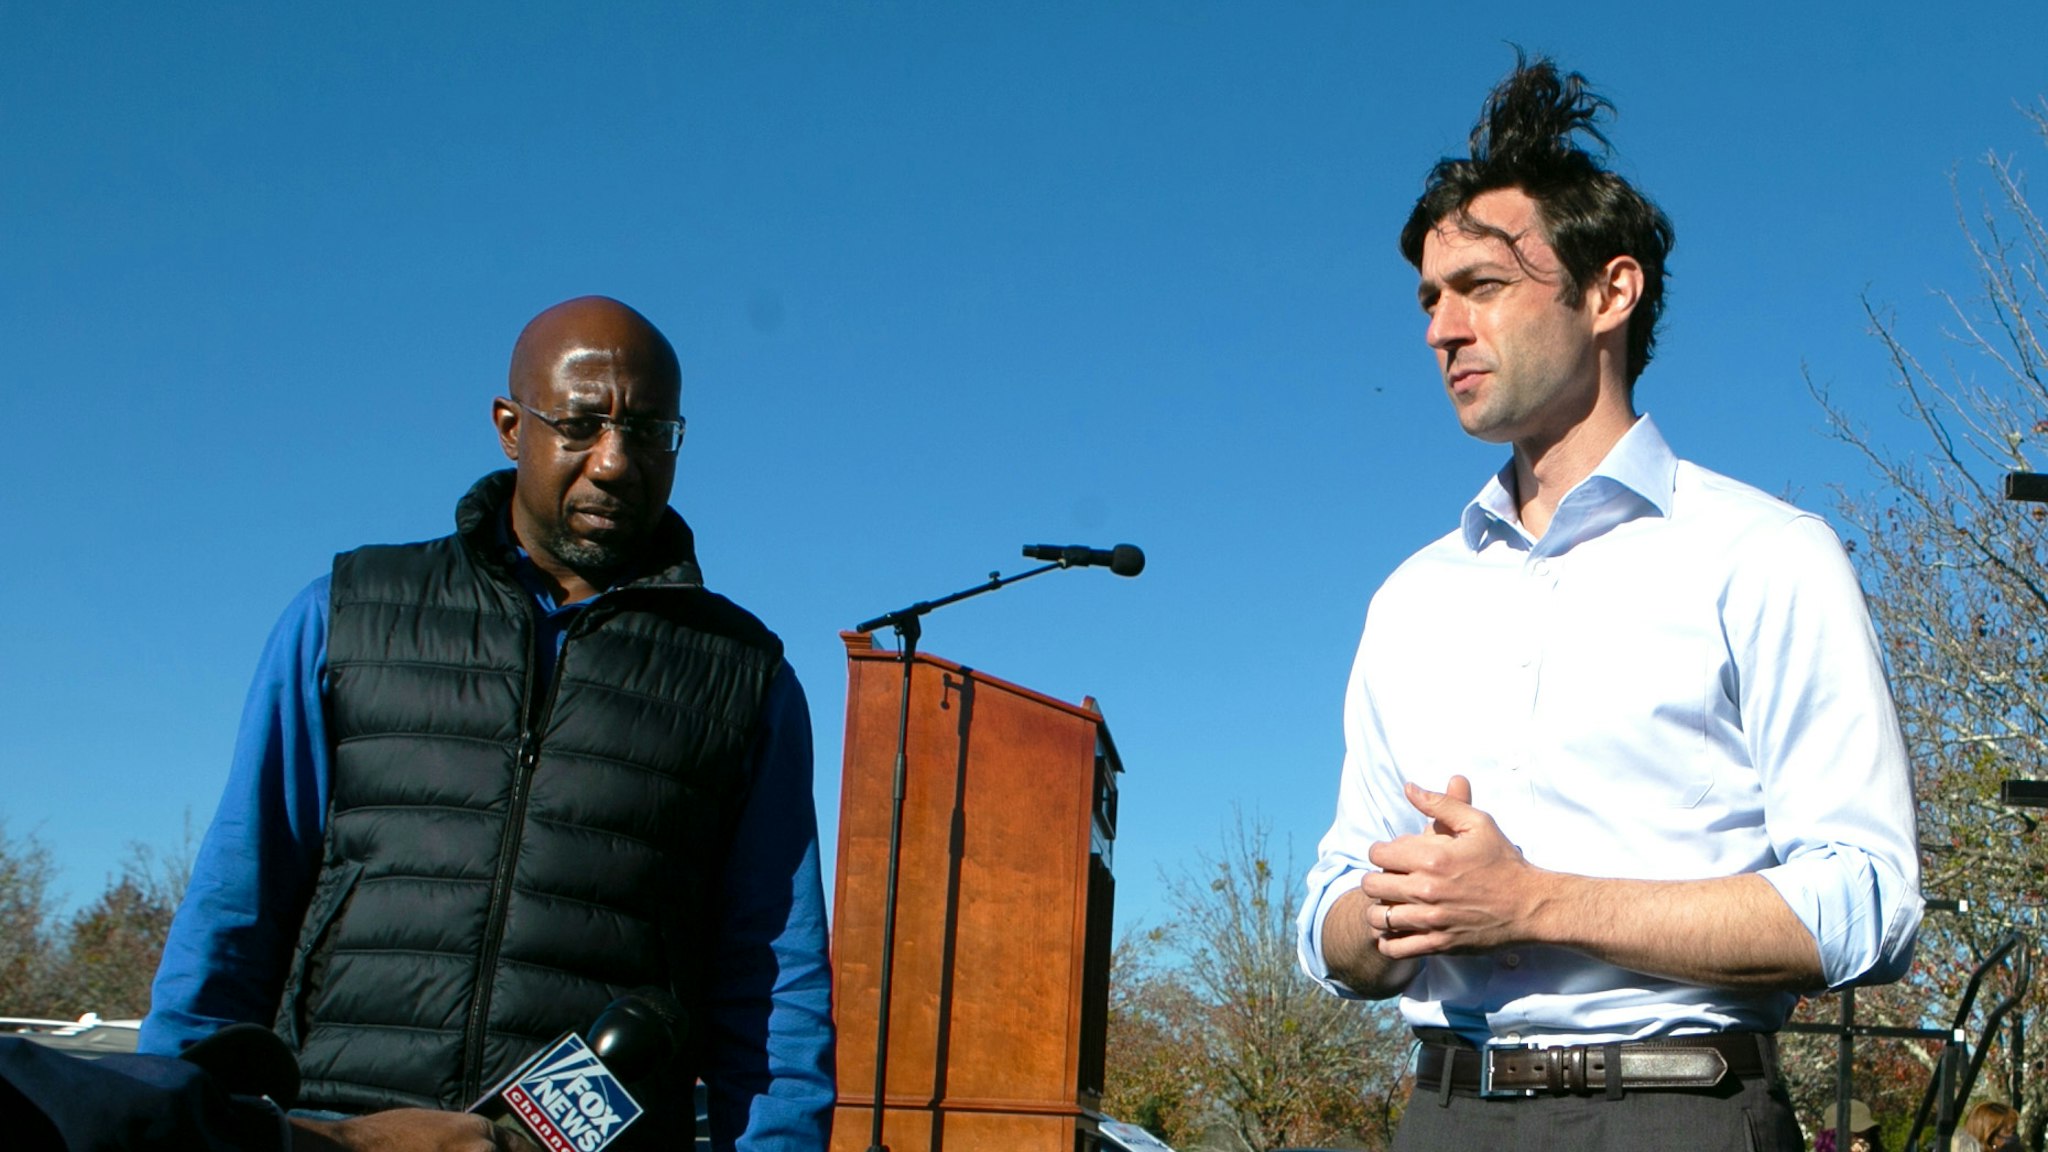 CONYERS, GA - DECEMBER 05: Democratic U.S. Senate candidates Raphael Warnock (L) and Jon Ossoff take questions from the press during an outdoor drive-in rally on December 5, 2020 in Conyers, Georgia. Ossoff and Warnock face Republican candidates Sen. David Purdue (R-GA) and Sen. Kelly Loeffler in a runoff election that will take place January 5th.